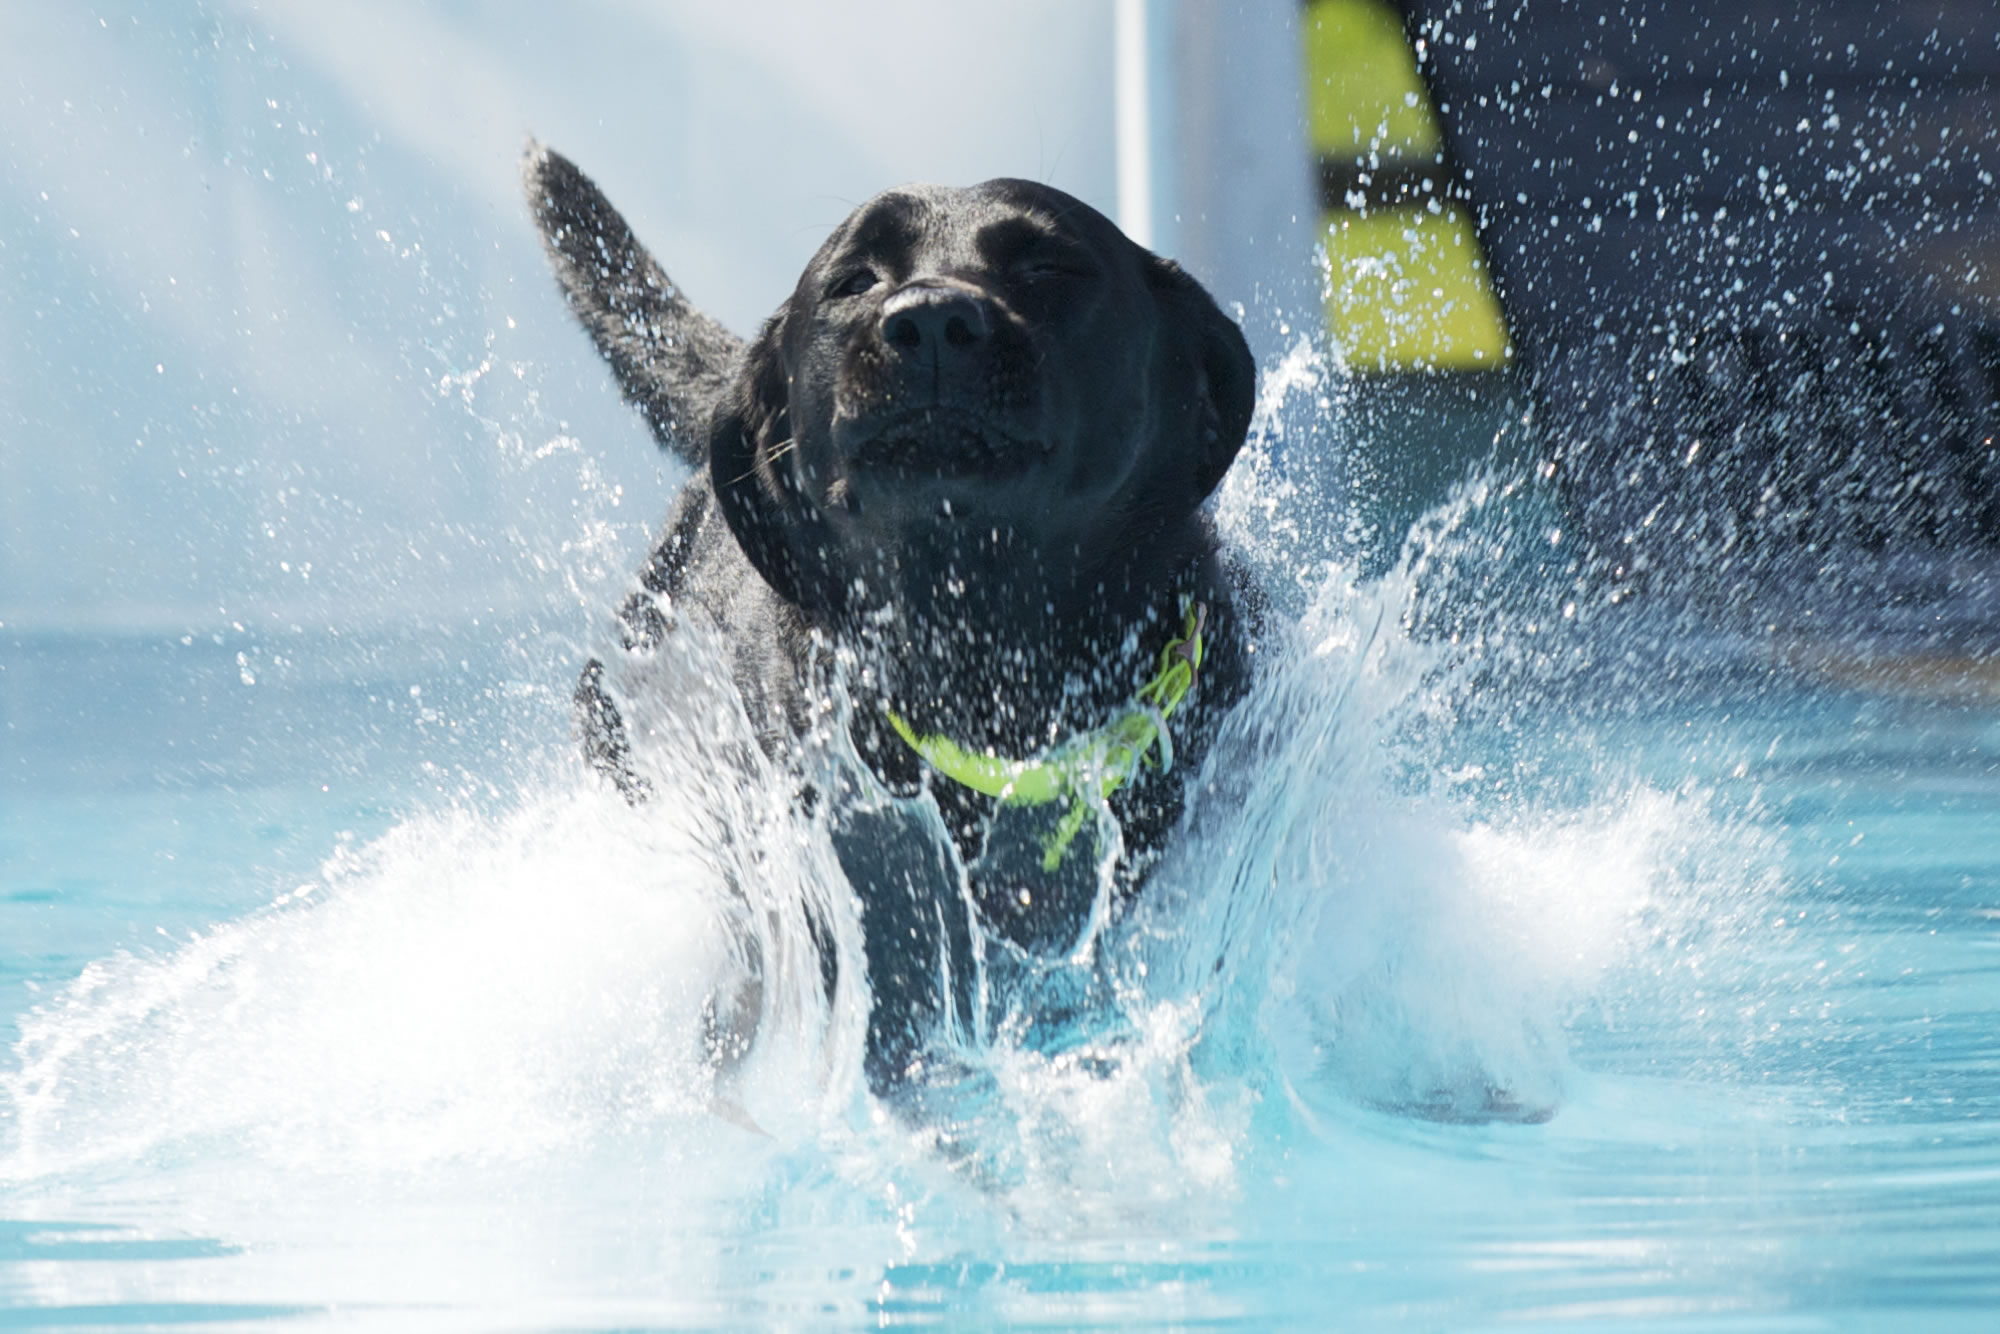 Diesel, a 21/2-year-old black Labrador owned by Wayne Snoderly of Battle Ground, powers through the water at Sunday's Speed Retrieval Dock Dogs event at the Clark County Fair.